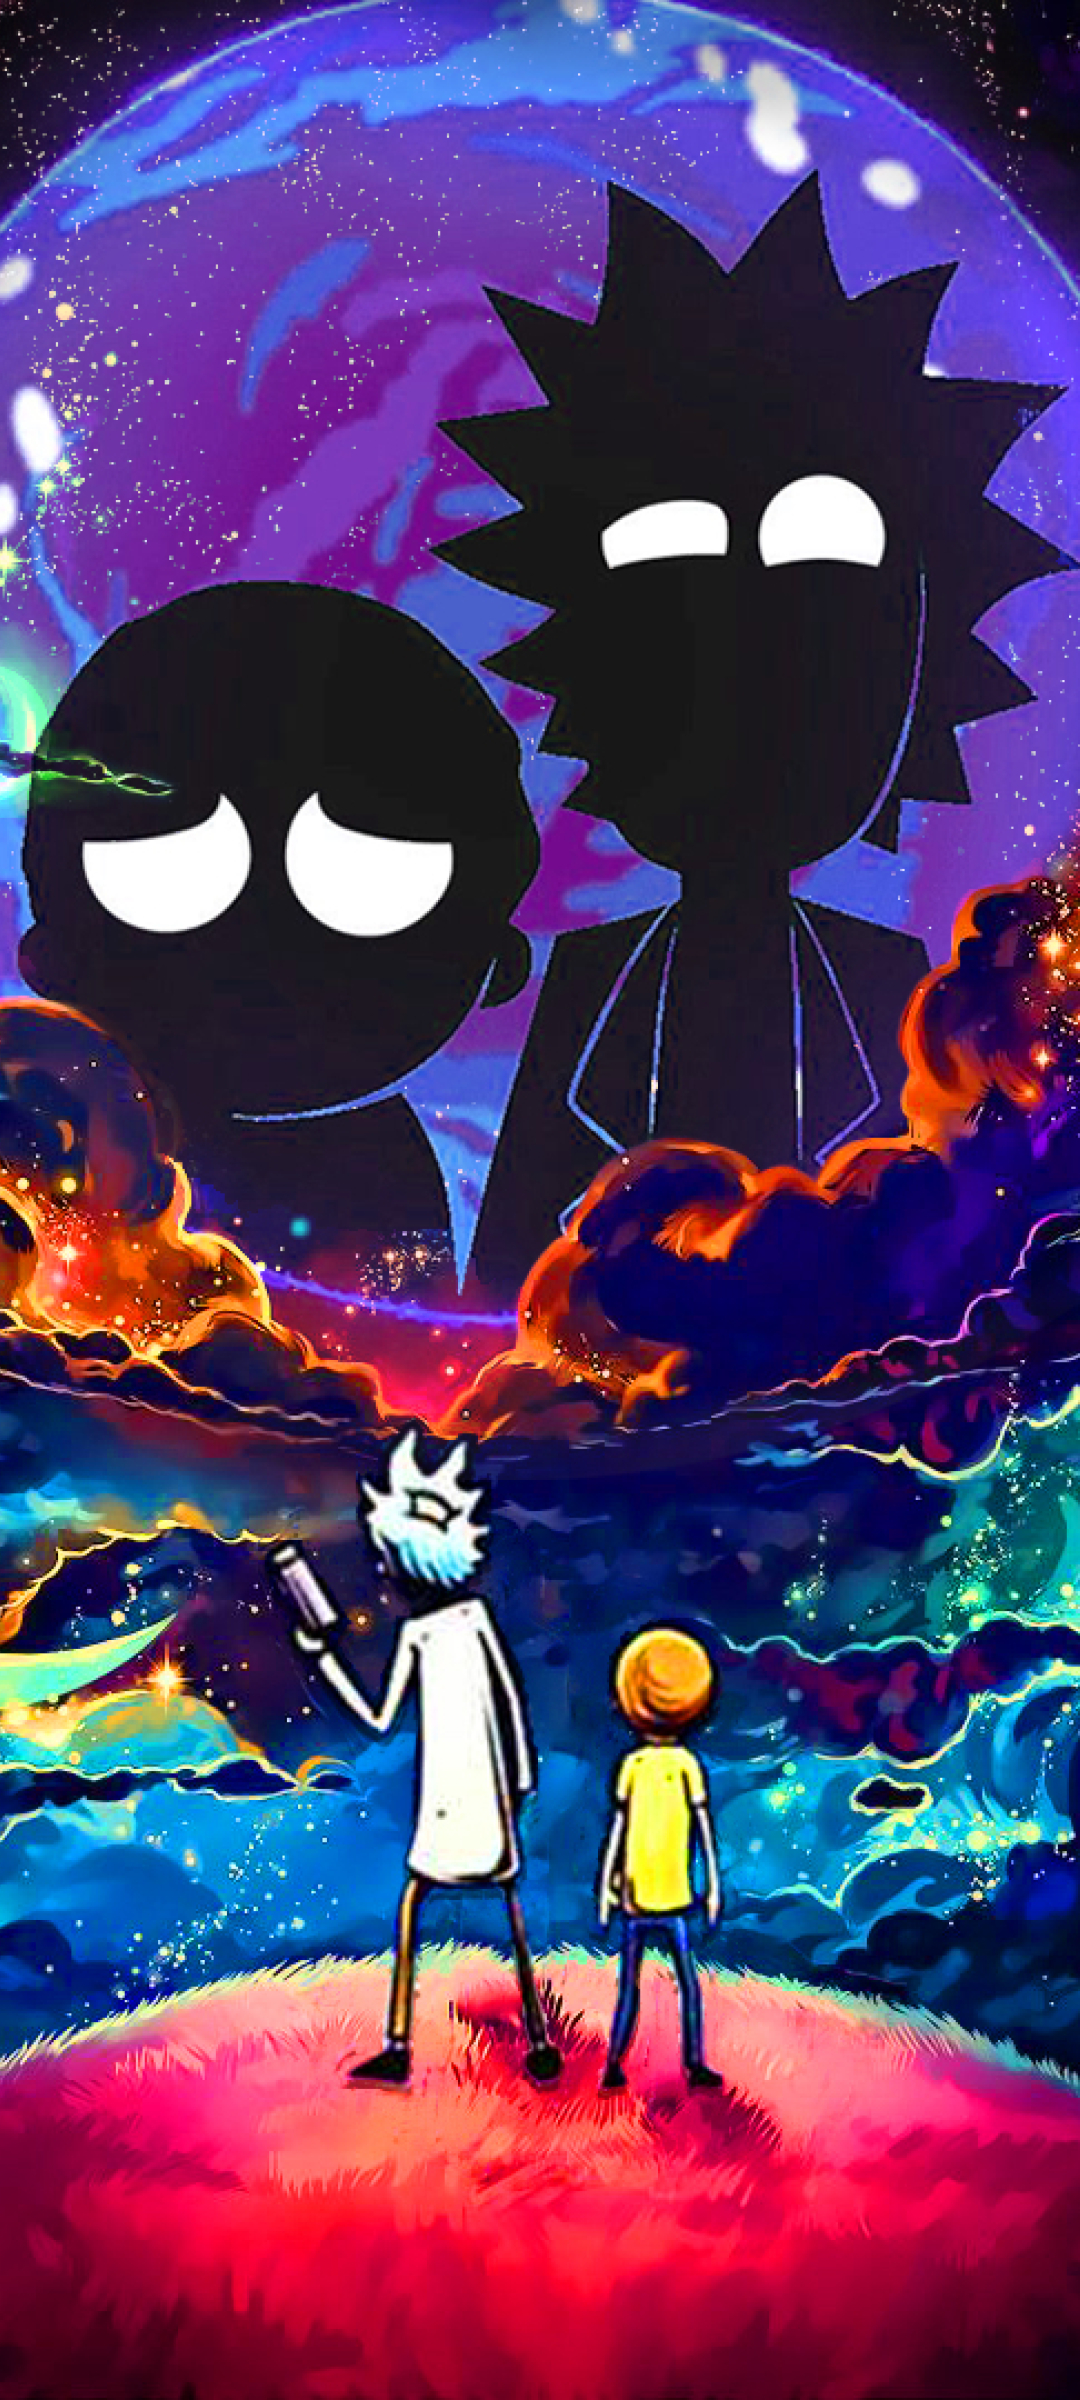 10 Best Desktop Wallpapers Rick And Morty You Can Save It Free